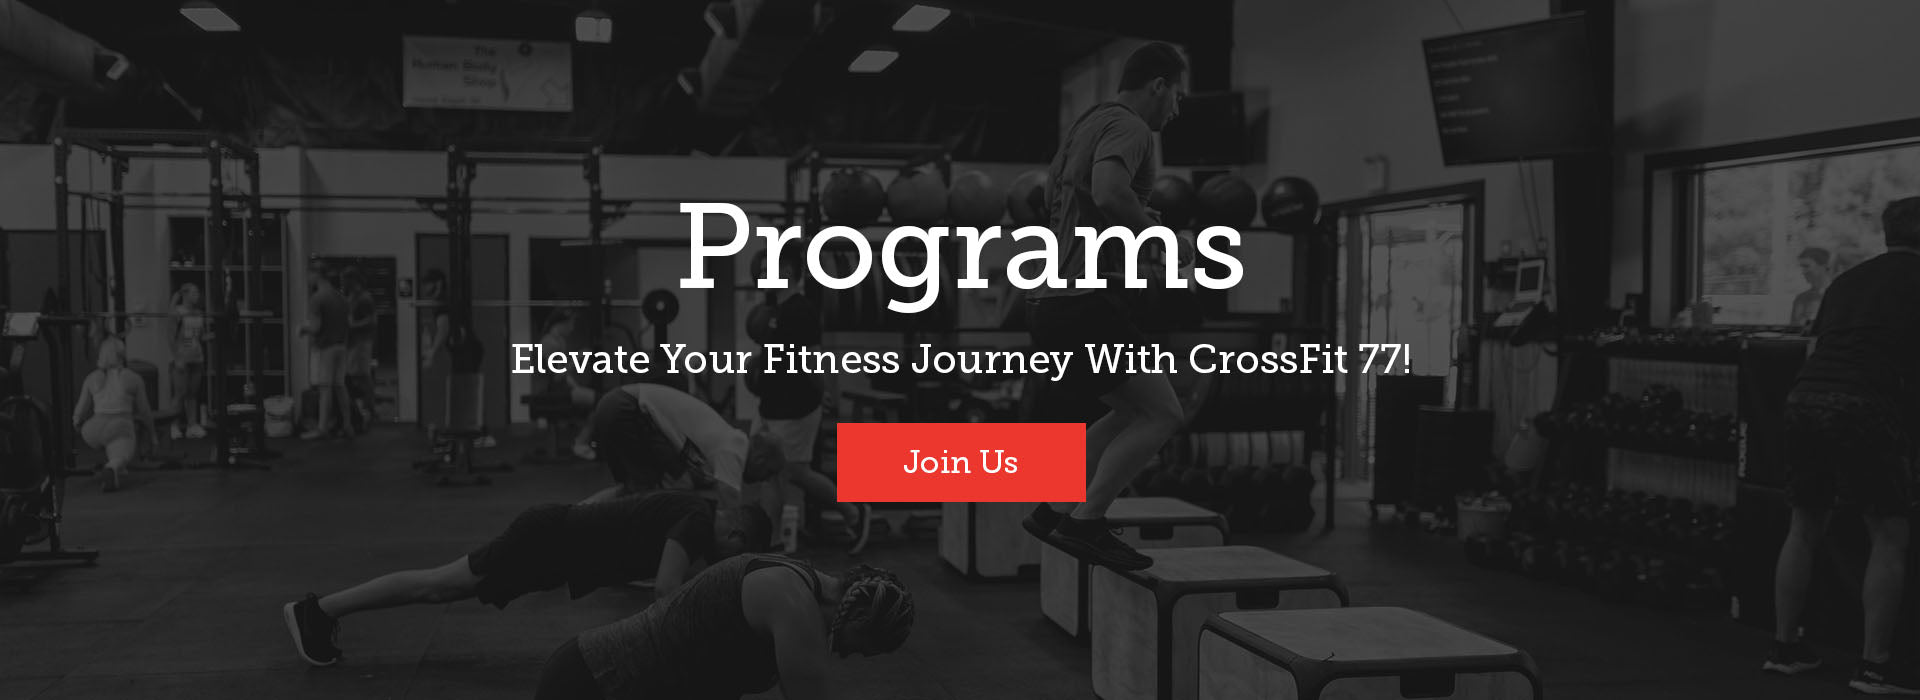 Programs Elevate Your Fitness Journey With CrossFit 77! CTA: Join Us